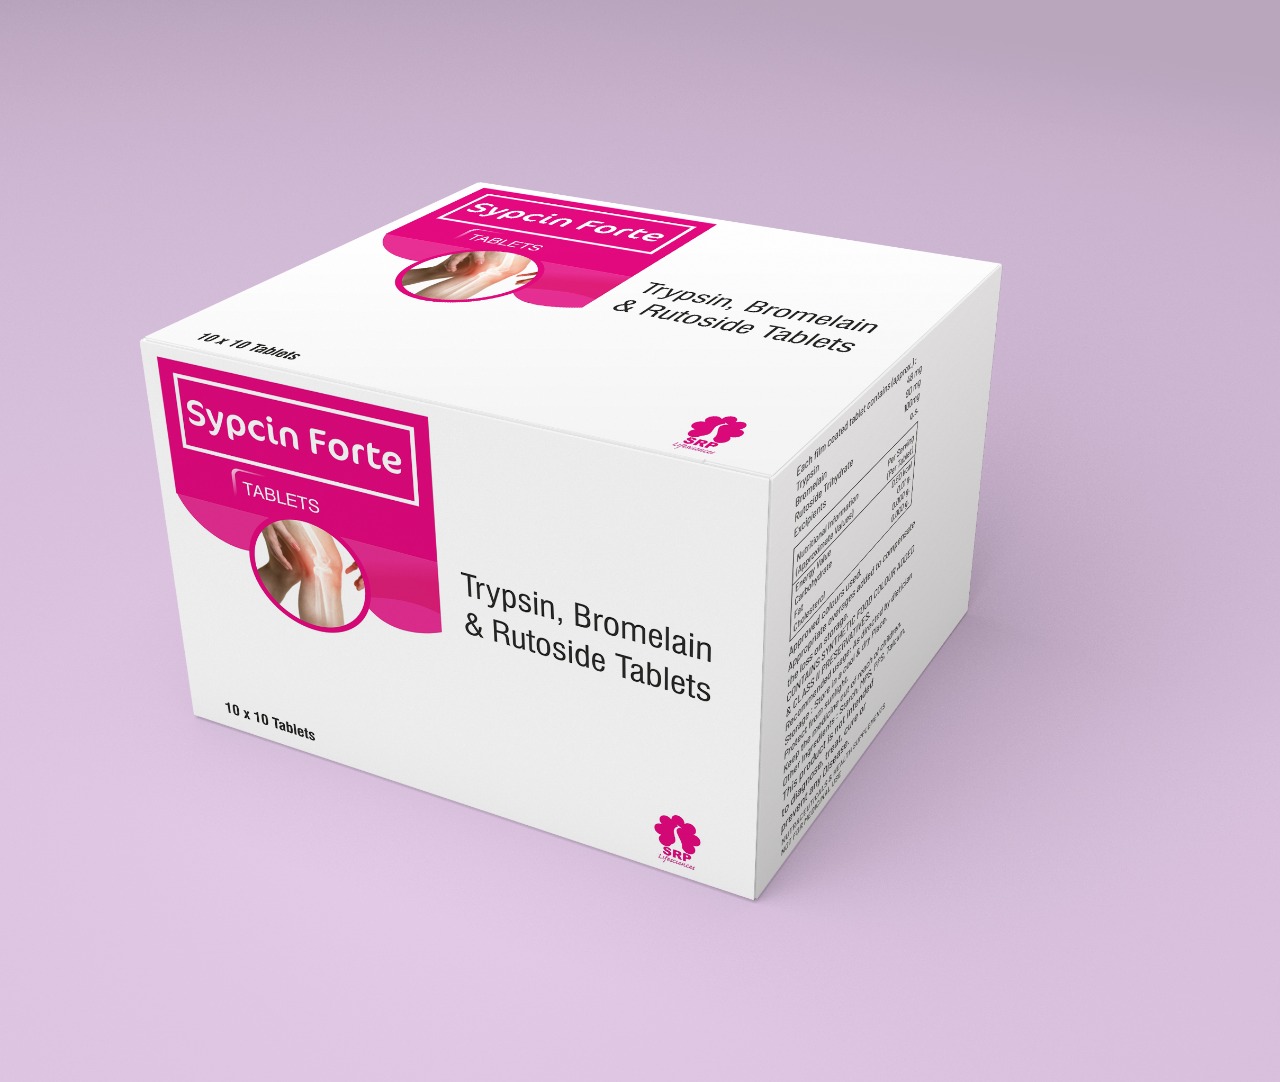 Product Name: Sypcin forte, Compositions of tryspin , bromelain and rutoside tablets are tryspin , bromelain and rutoside tablets - Cynak Healthcare